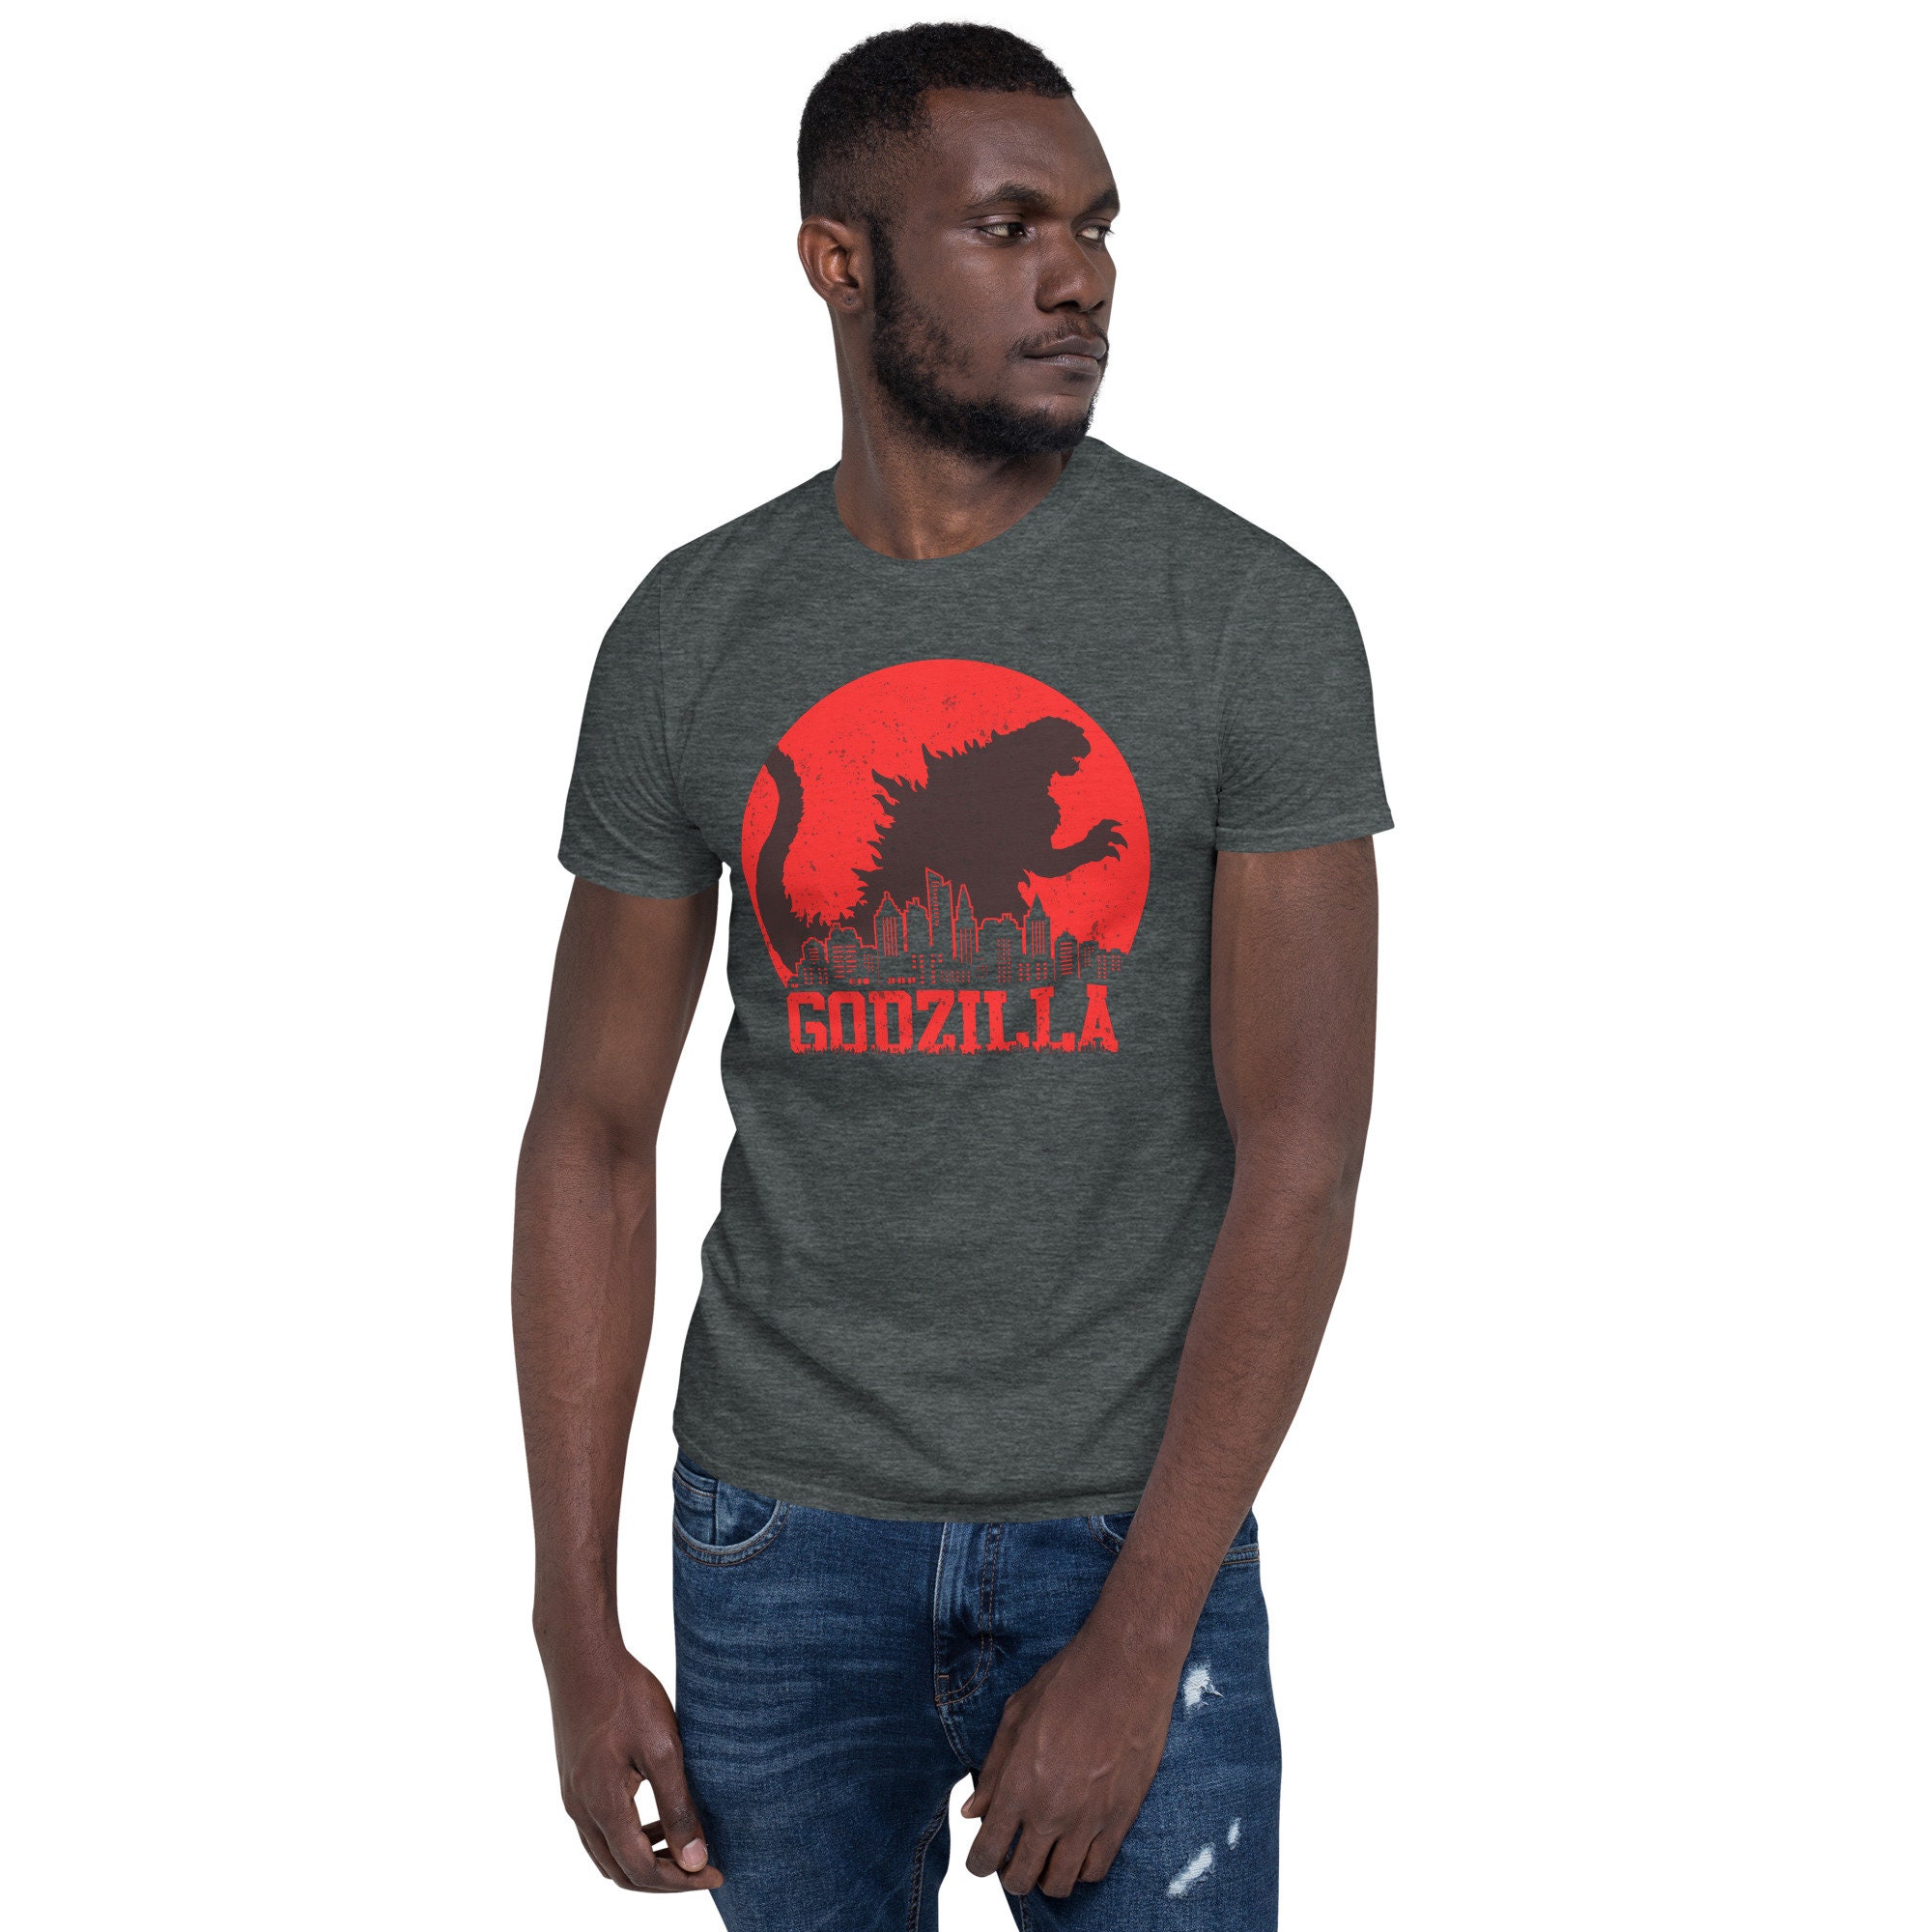 Discover Godzilla T-Shirt, Cool Japanese Kaiju Movie Monster Shirt, King of the Monsters, Adult Birthday Gift Tee, Unisex T Shirt for Men & Women